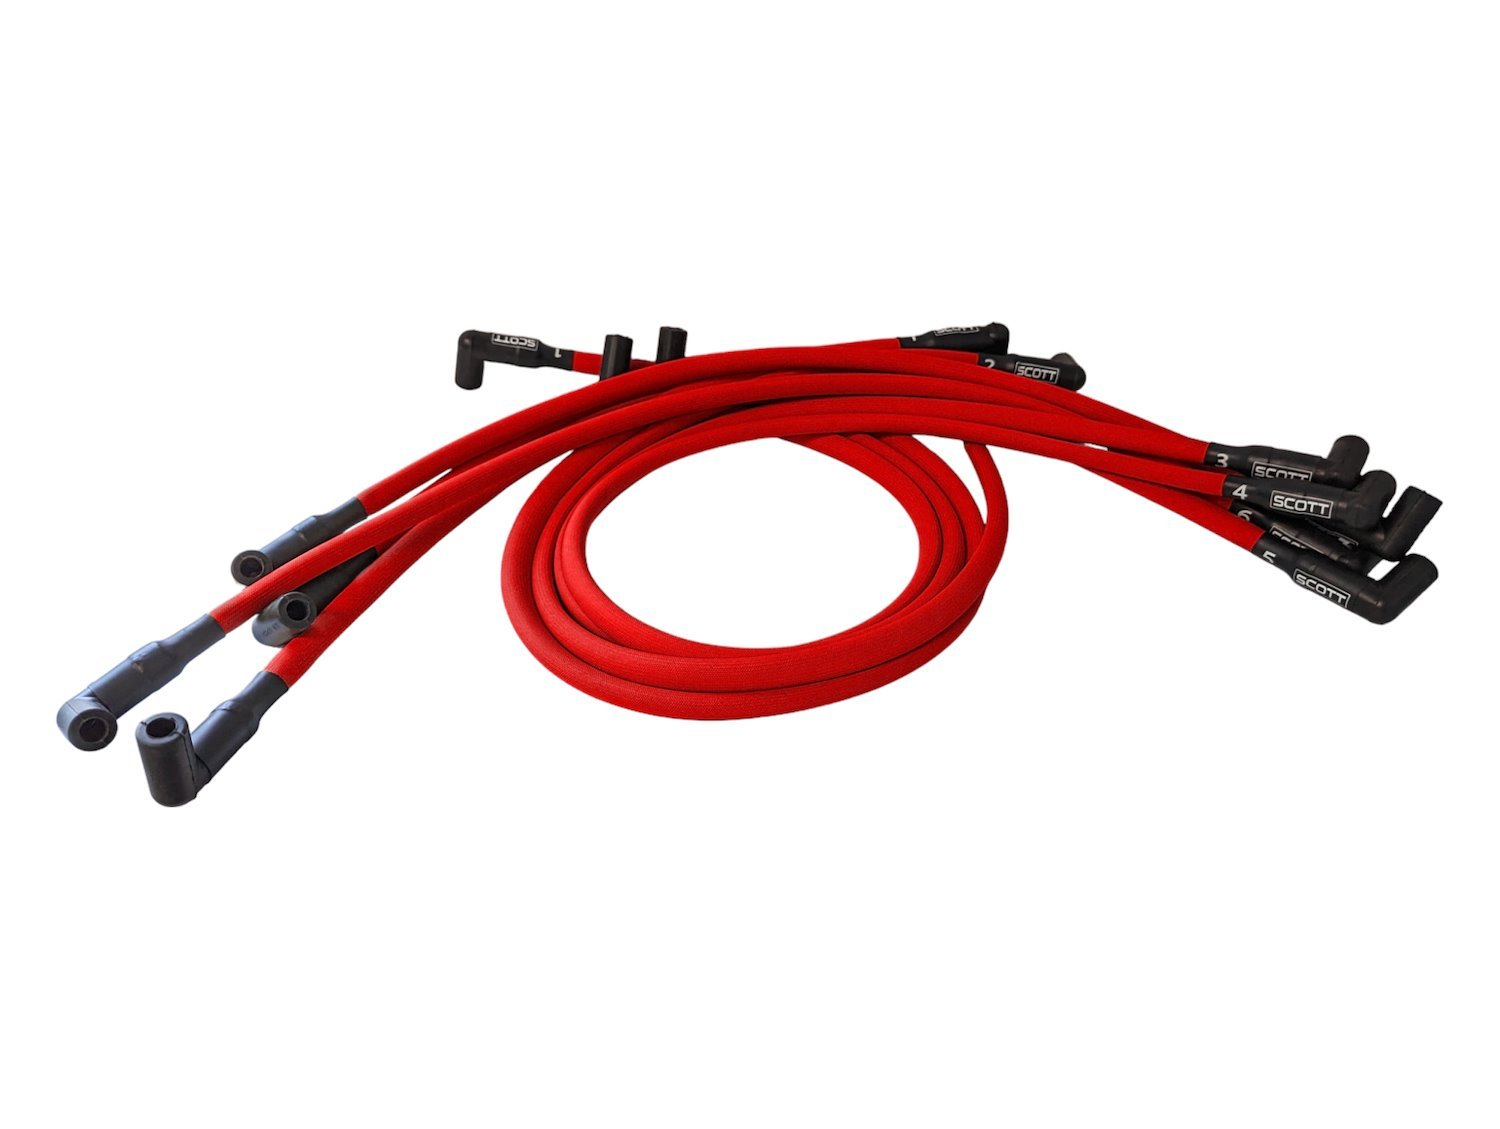 SPW300-PS-407-2 Super Mag Fiberglass-Oversleeved Spark Plug Wire Set for Small Block Chevy, Under Header [Red]